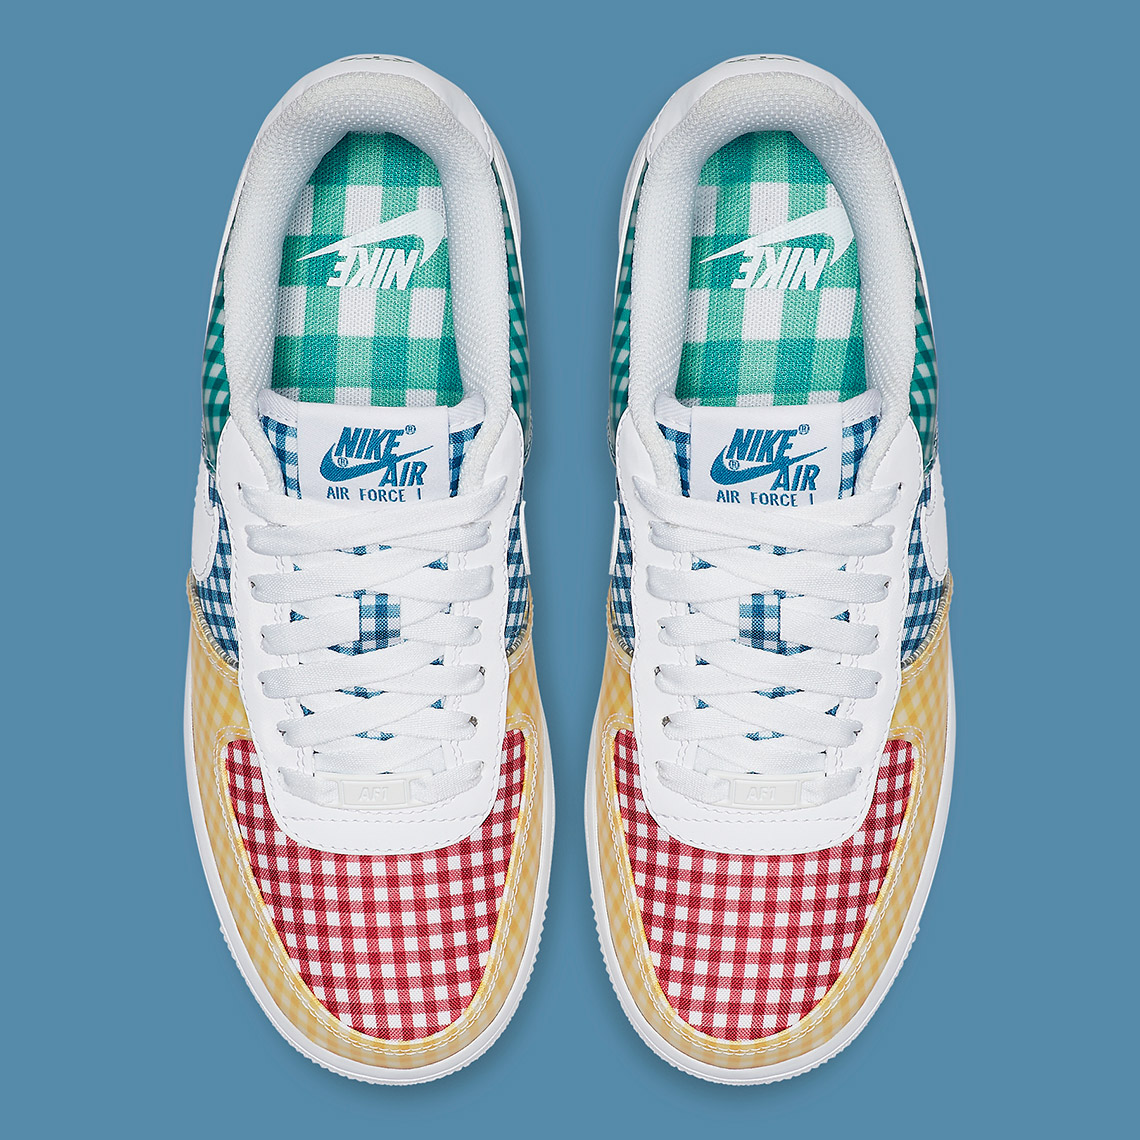 nike air force 1 gingham release date